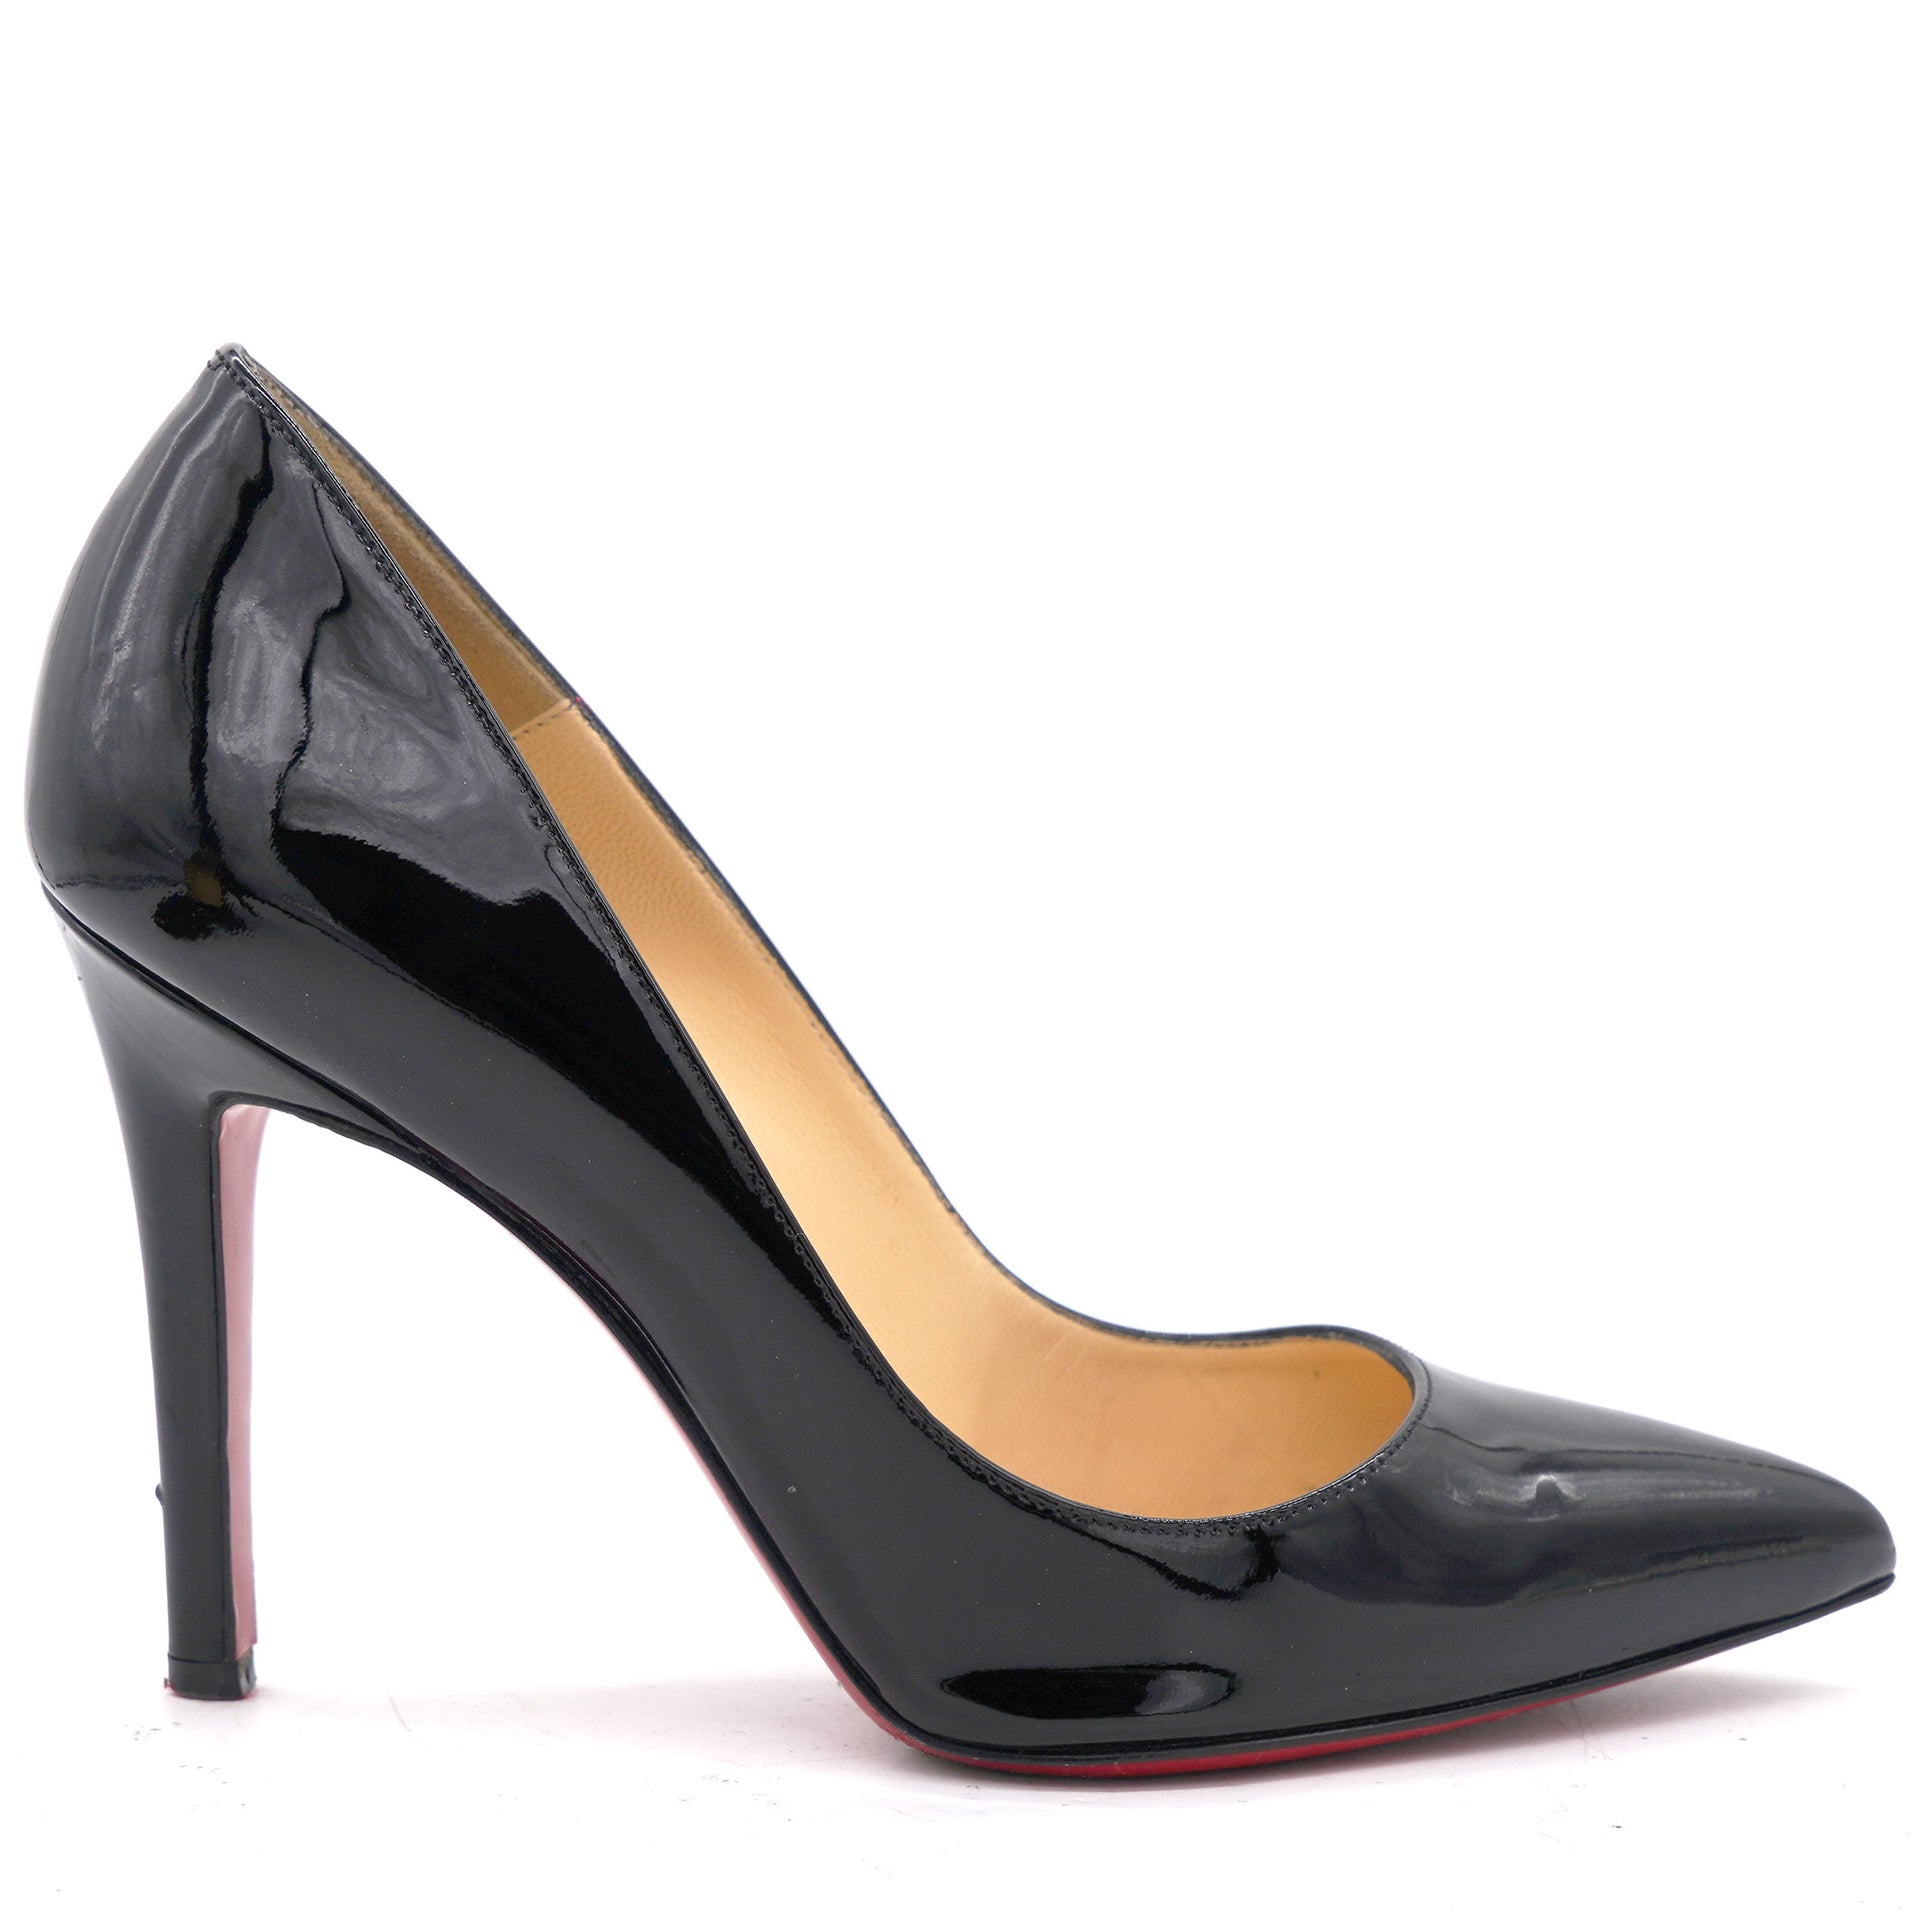 Louboutin Black Patent Leather Pigalle 100 34.5